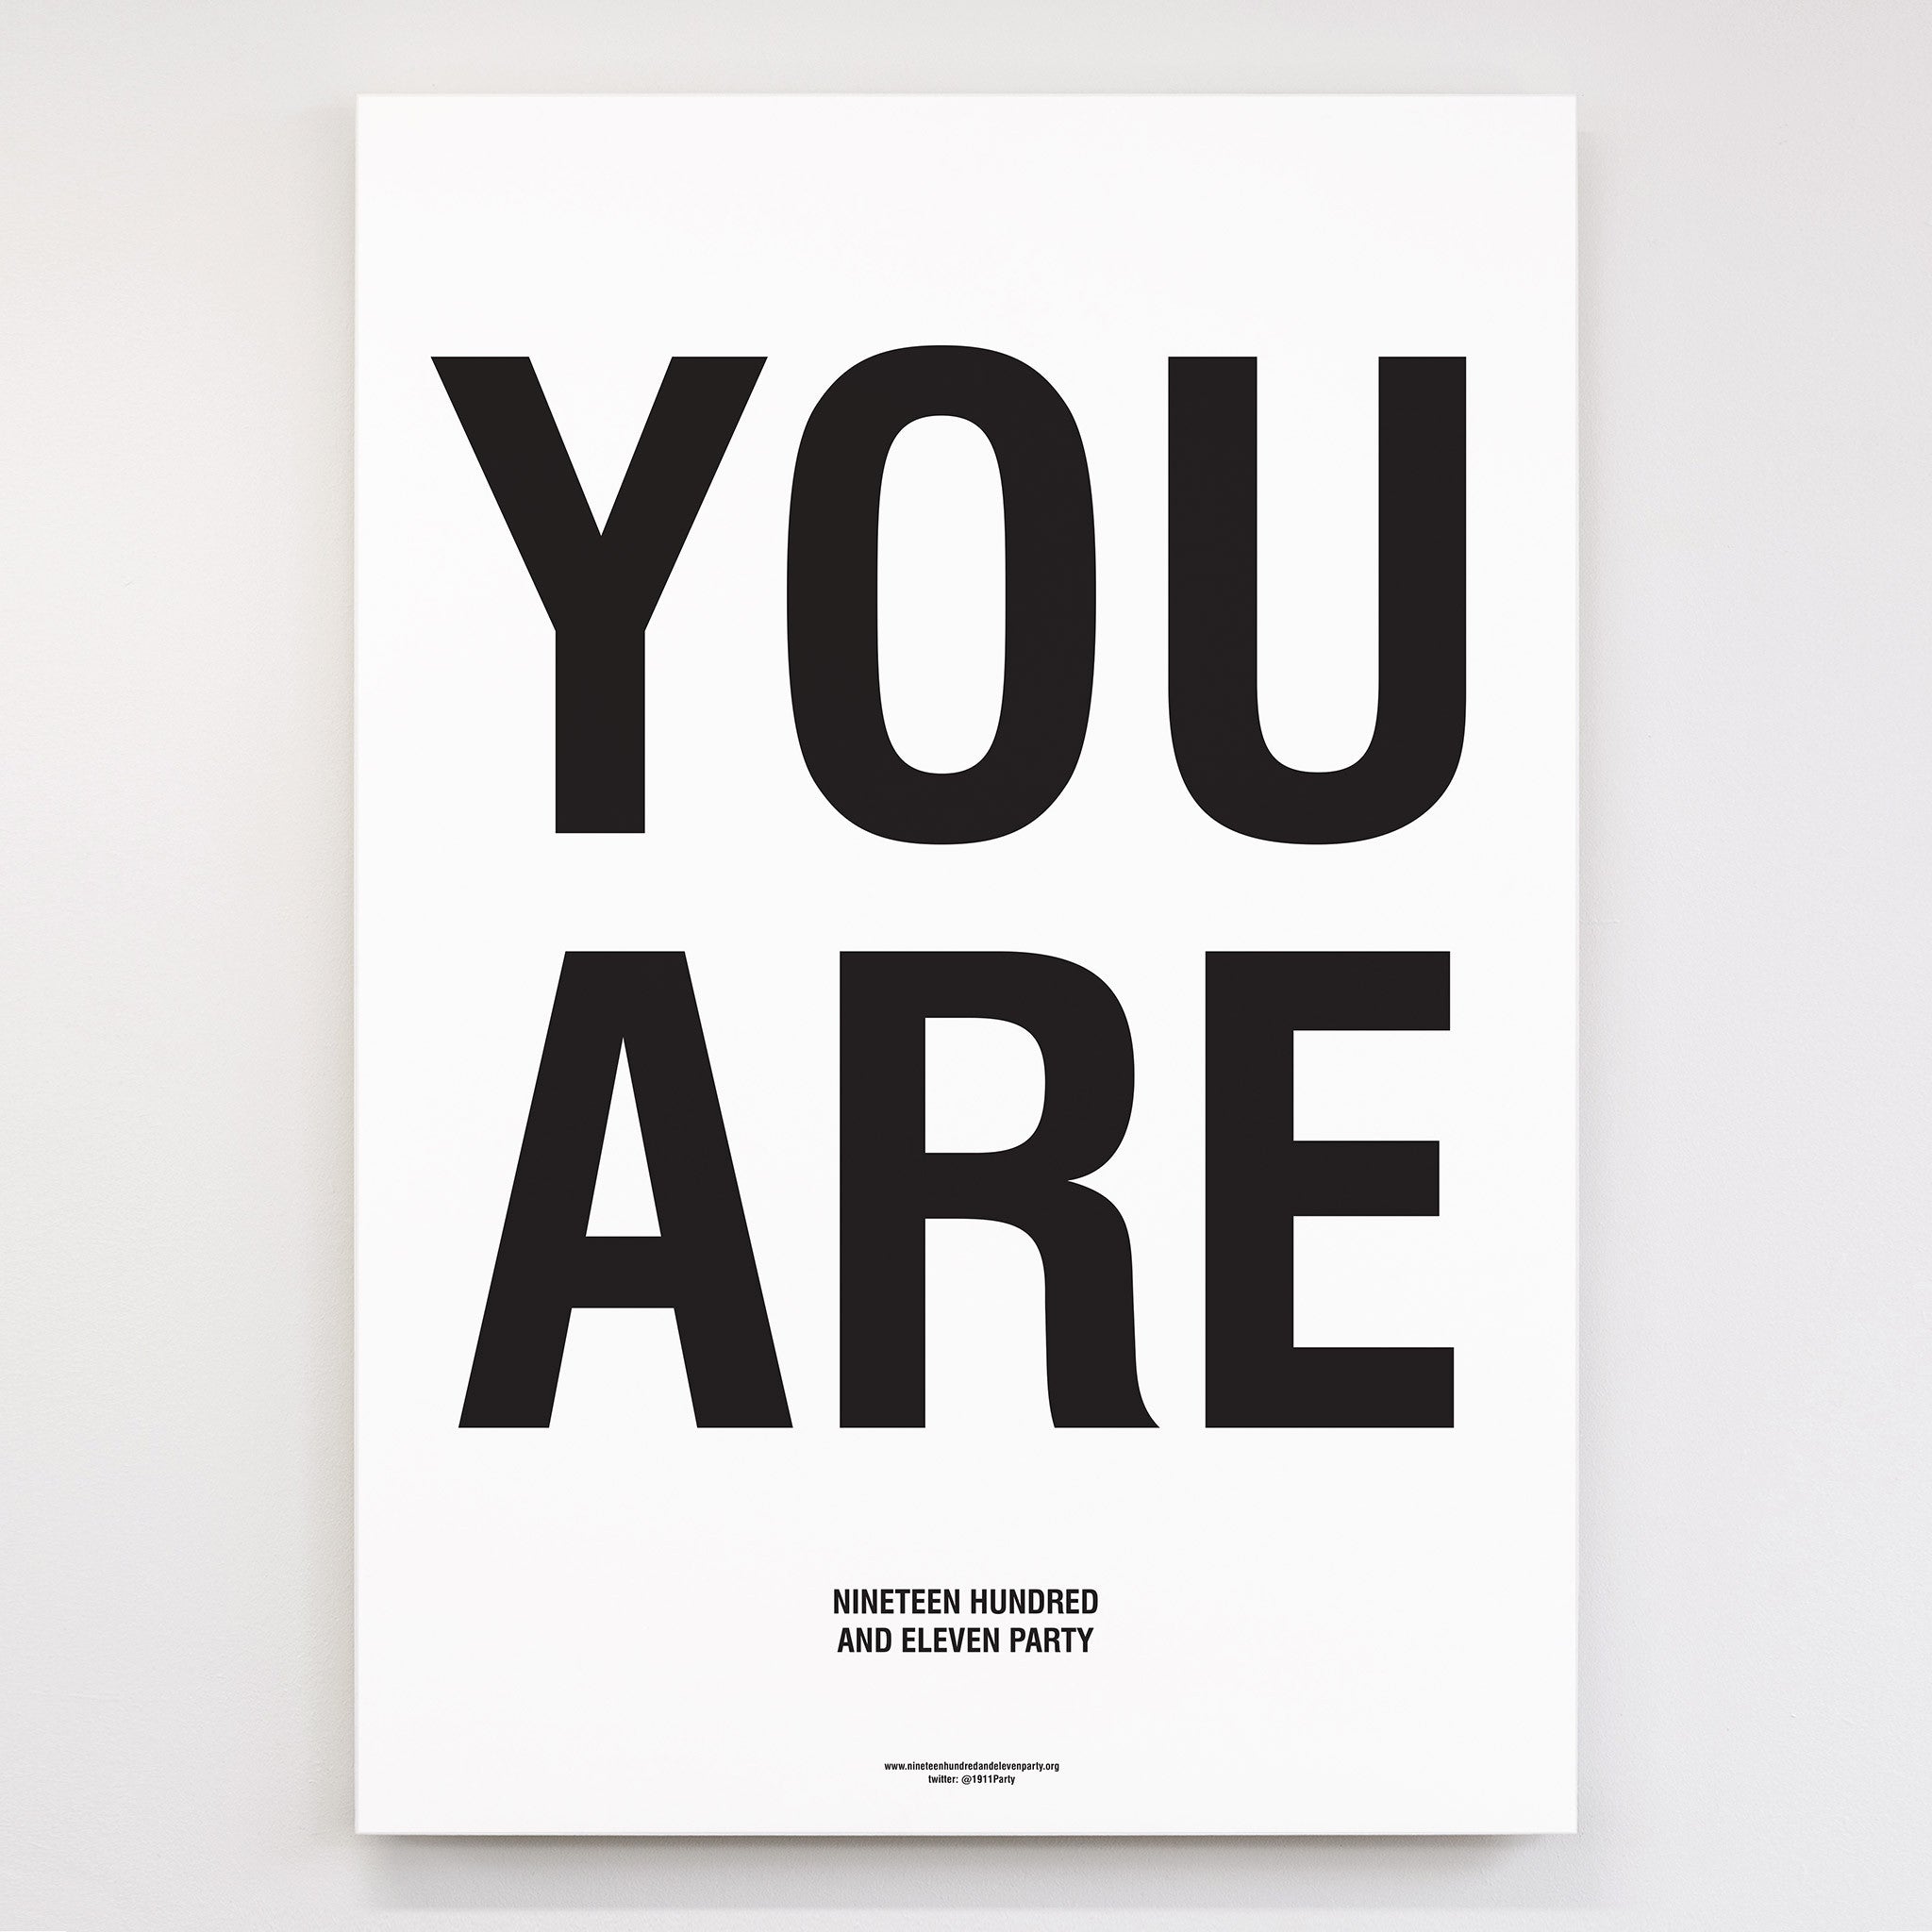 Nineteen Hundred and Eleven Party: You Are Screen Print